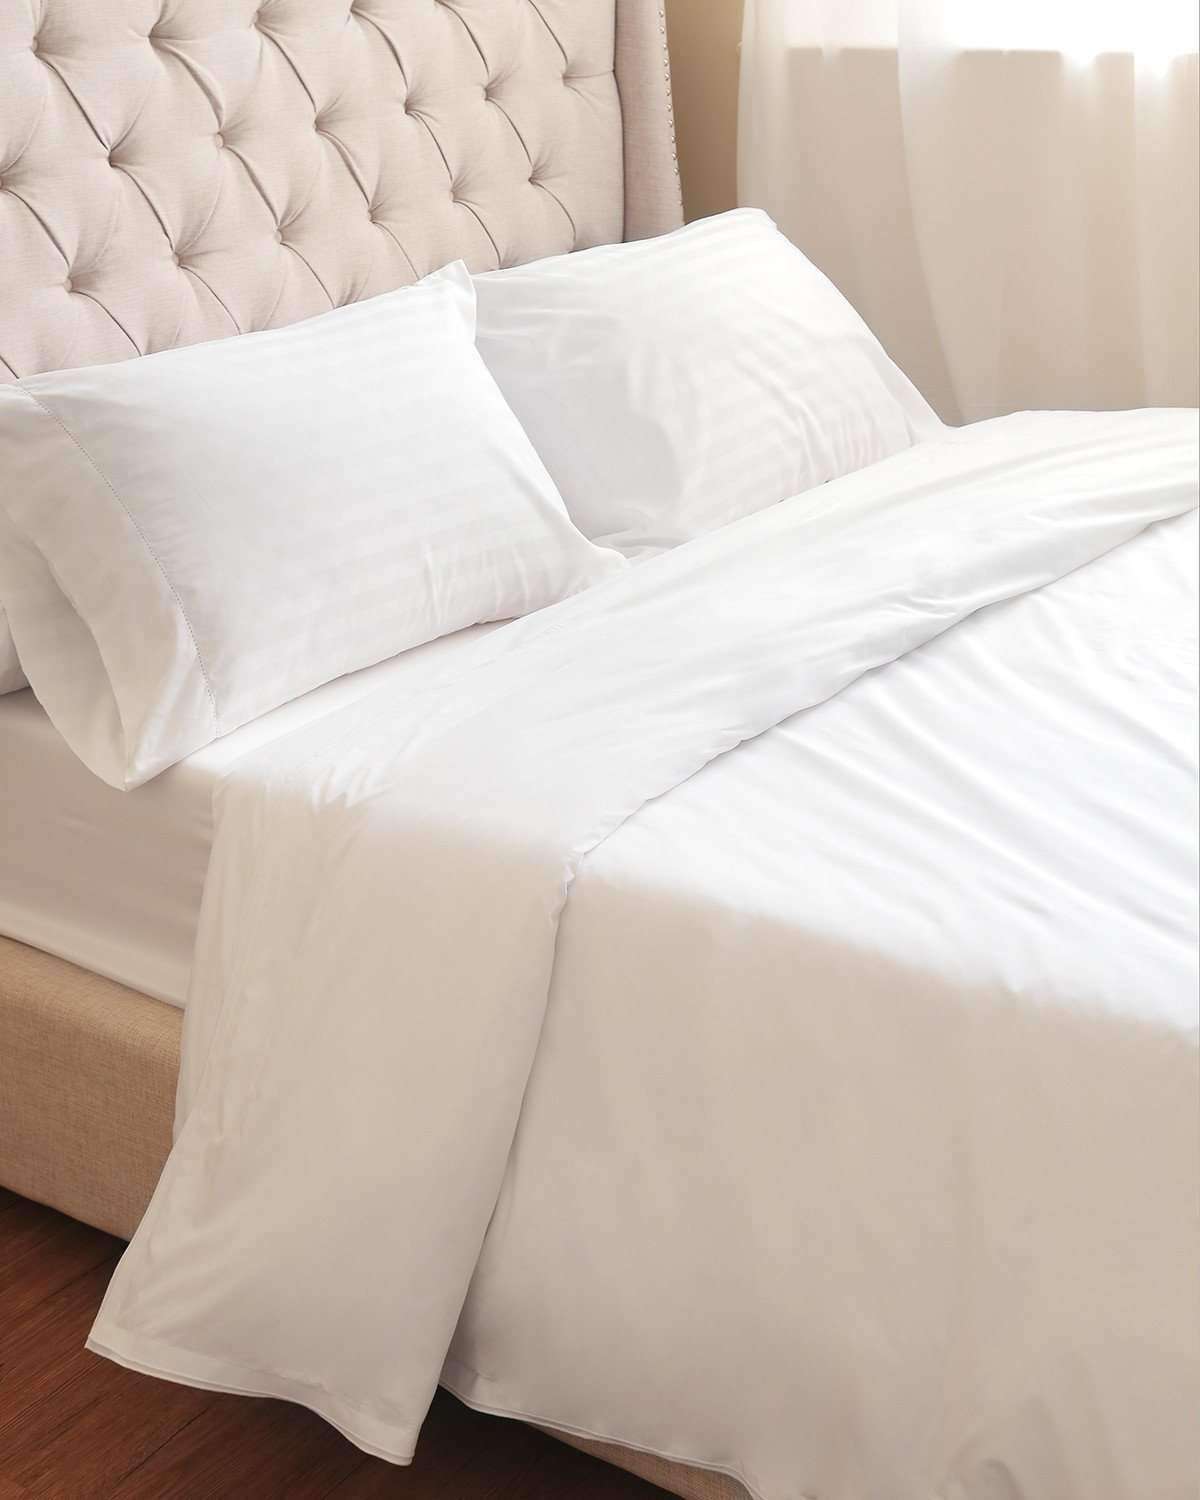 Serenity Egyptian Cotton Percale Duvet Cover